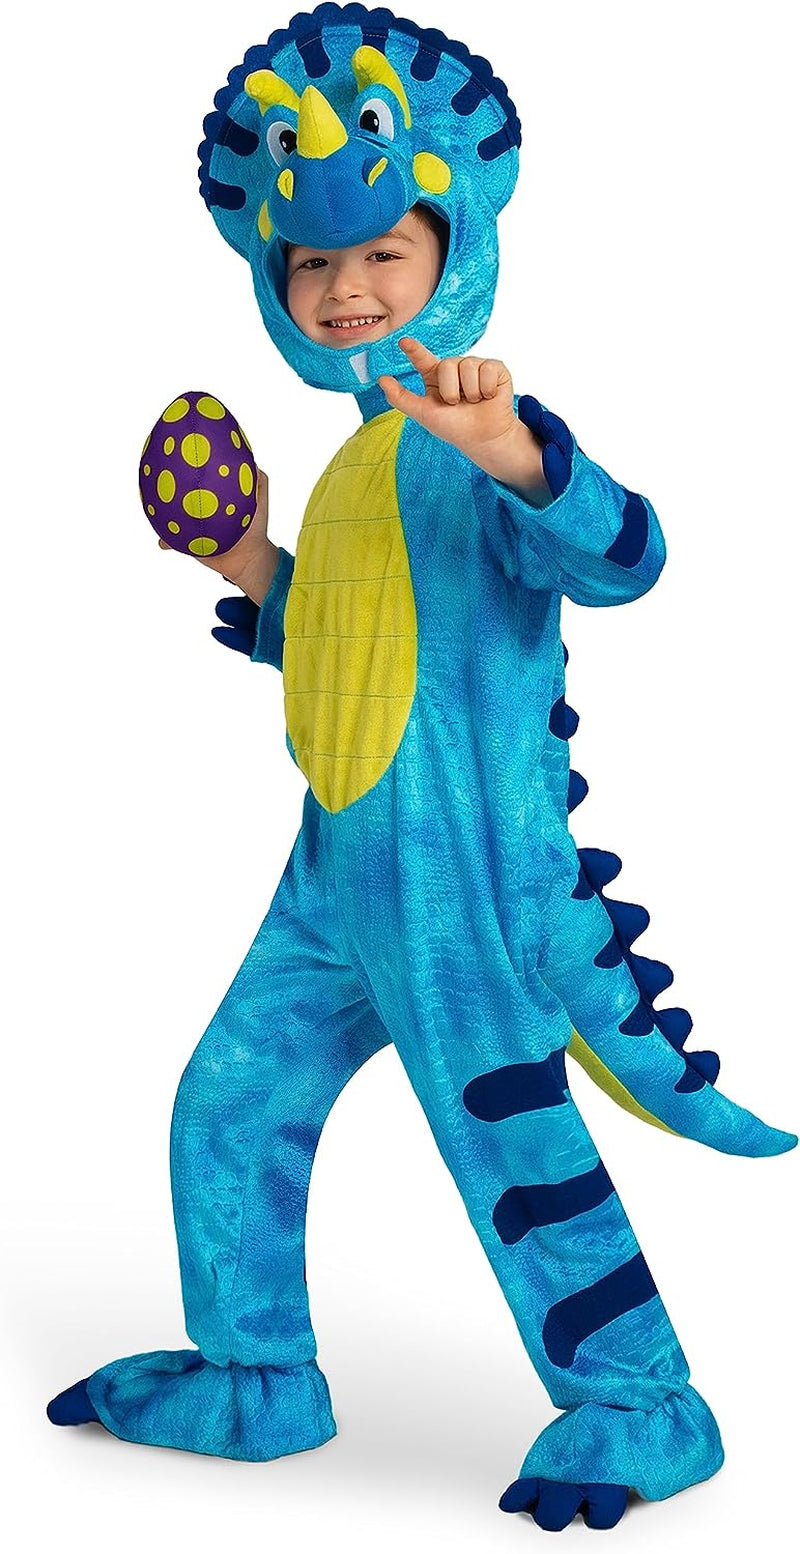 Spooktacular Creations Green Triceratops Dinosaur Costume with Toy Egg for Kid Halloween Dress up Dino Themed Pretend Party (3T (3-4 Yrs))  Joyin Inc Blue 18-24 Months 